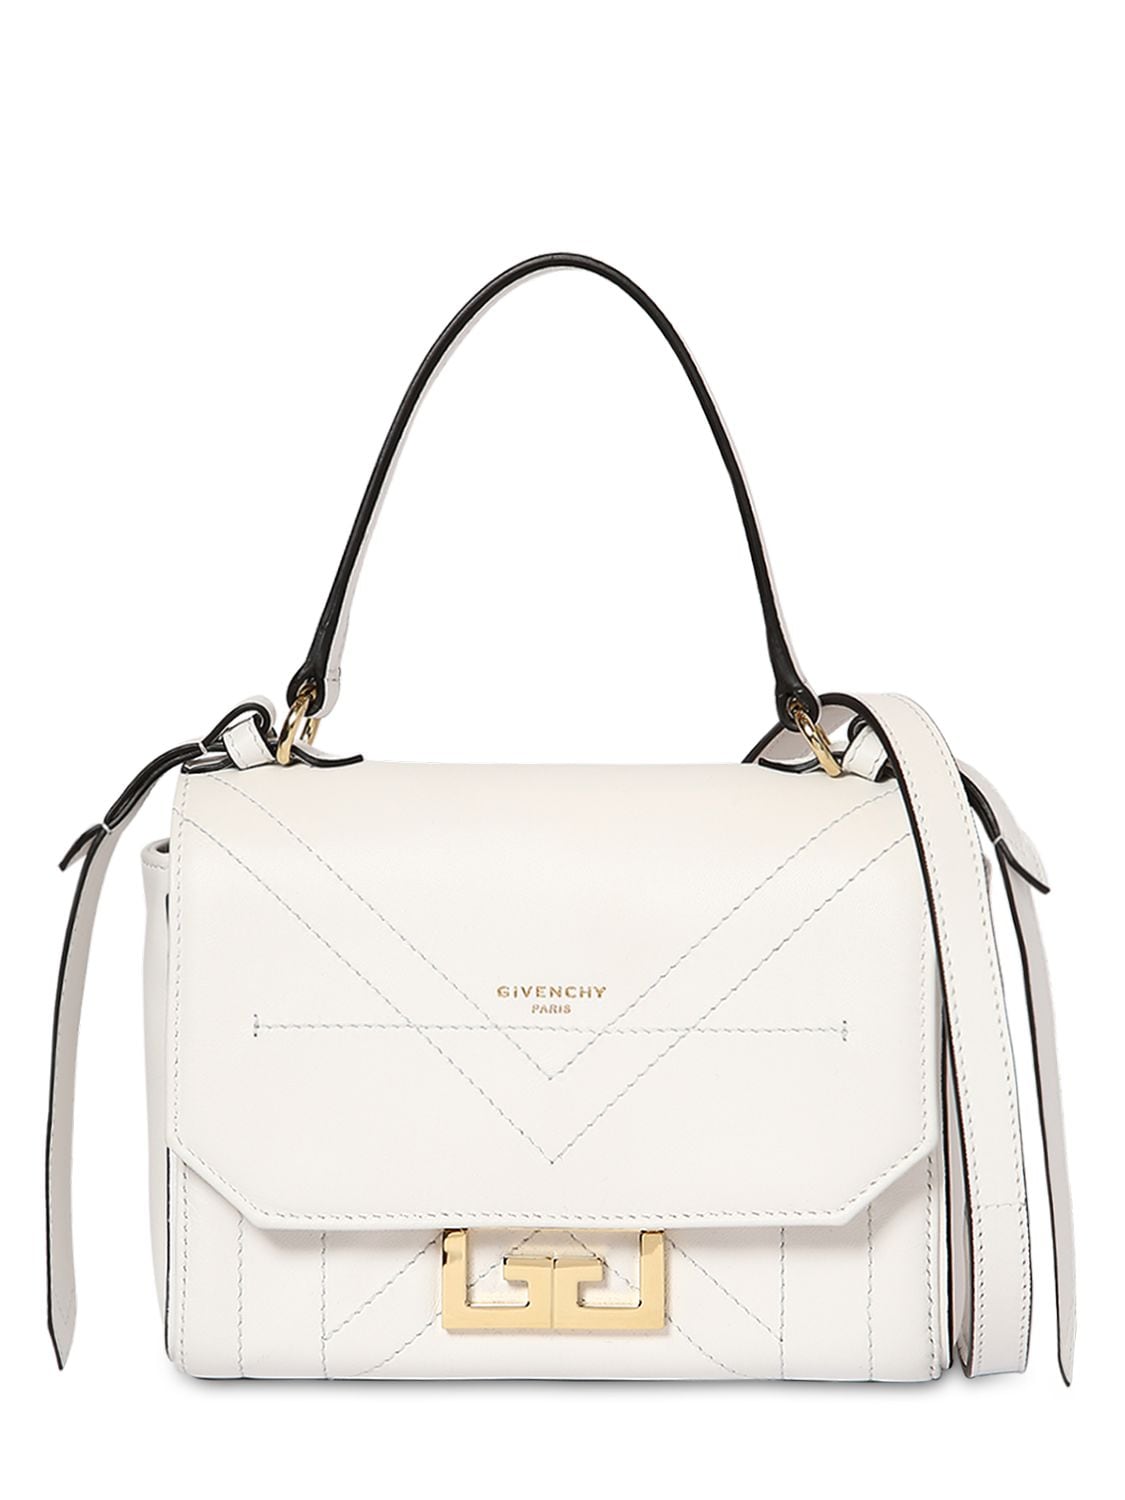 GIVENCHY MINI EDEN SMOOTH LEATHER BAG,70ID1A006-MTAW0